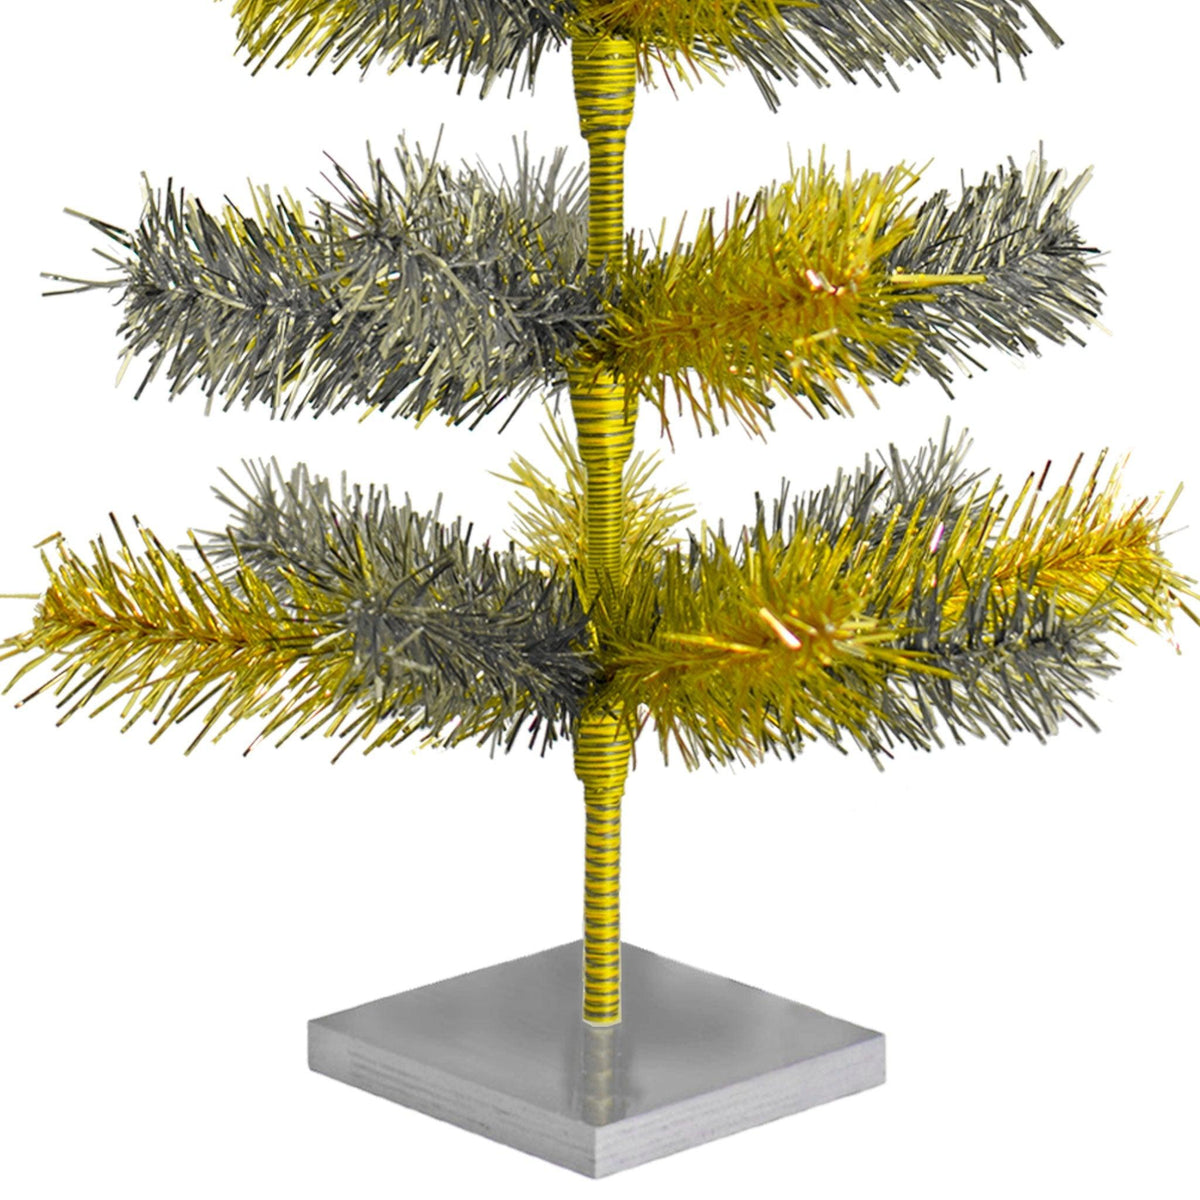 24in tall Gold and Silver Mixed Tinsel Brush Christmas Trees come with a silver wooden stand